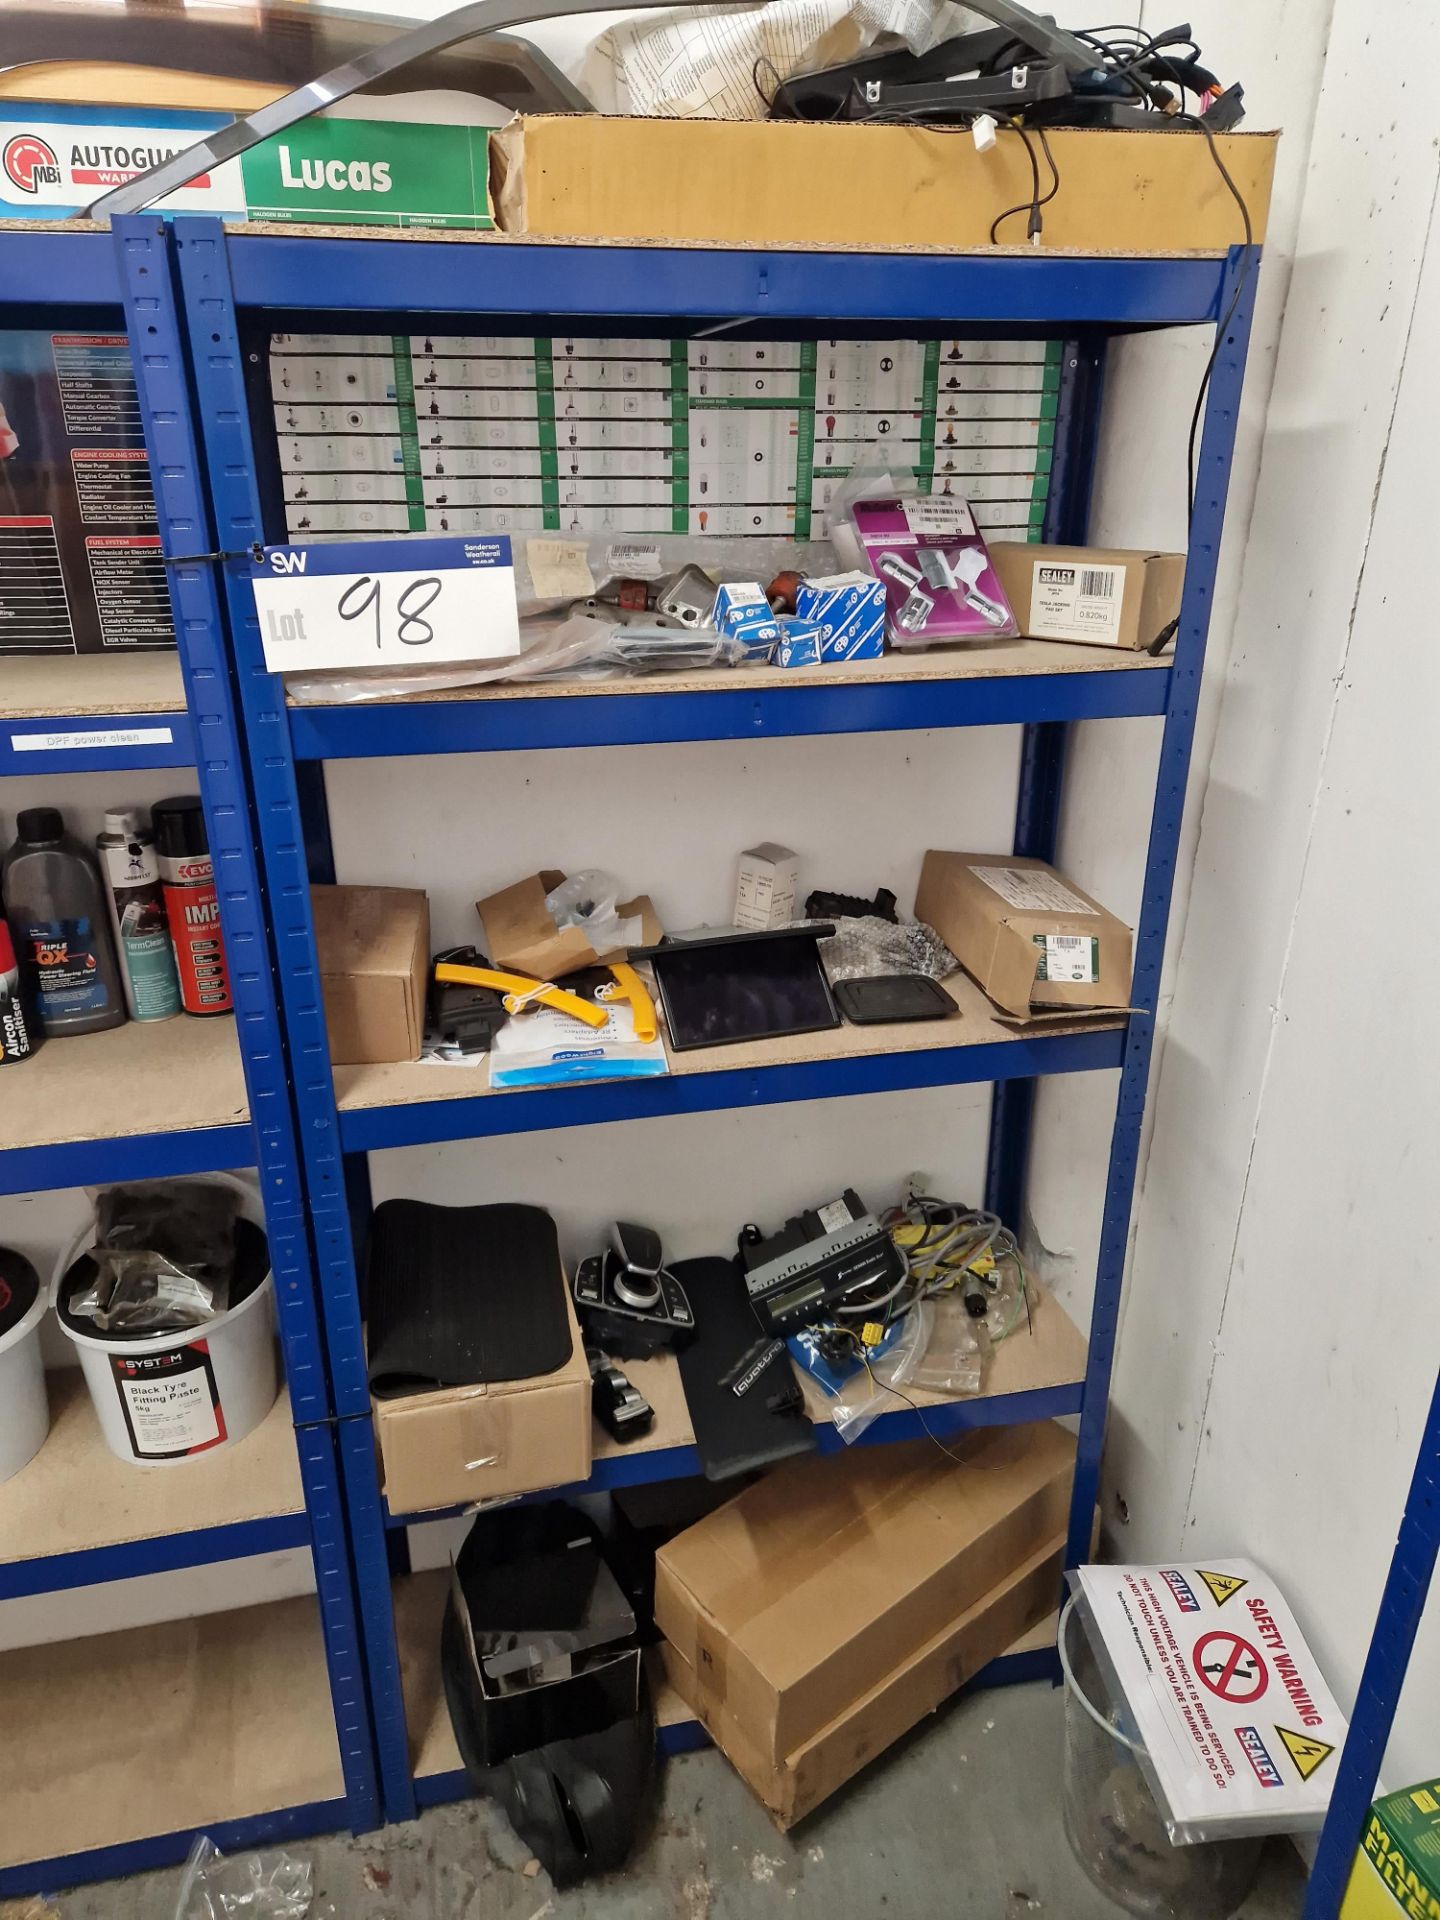 Contents to One Bay of Racking, including BMW and Audi Components, Sensors, Jacking Pads, etc Please